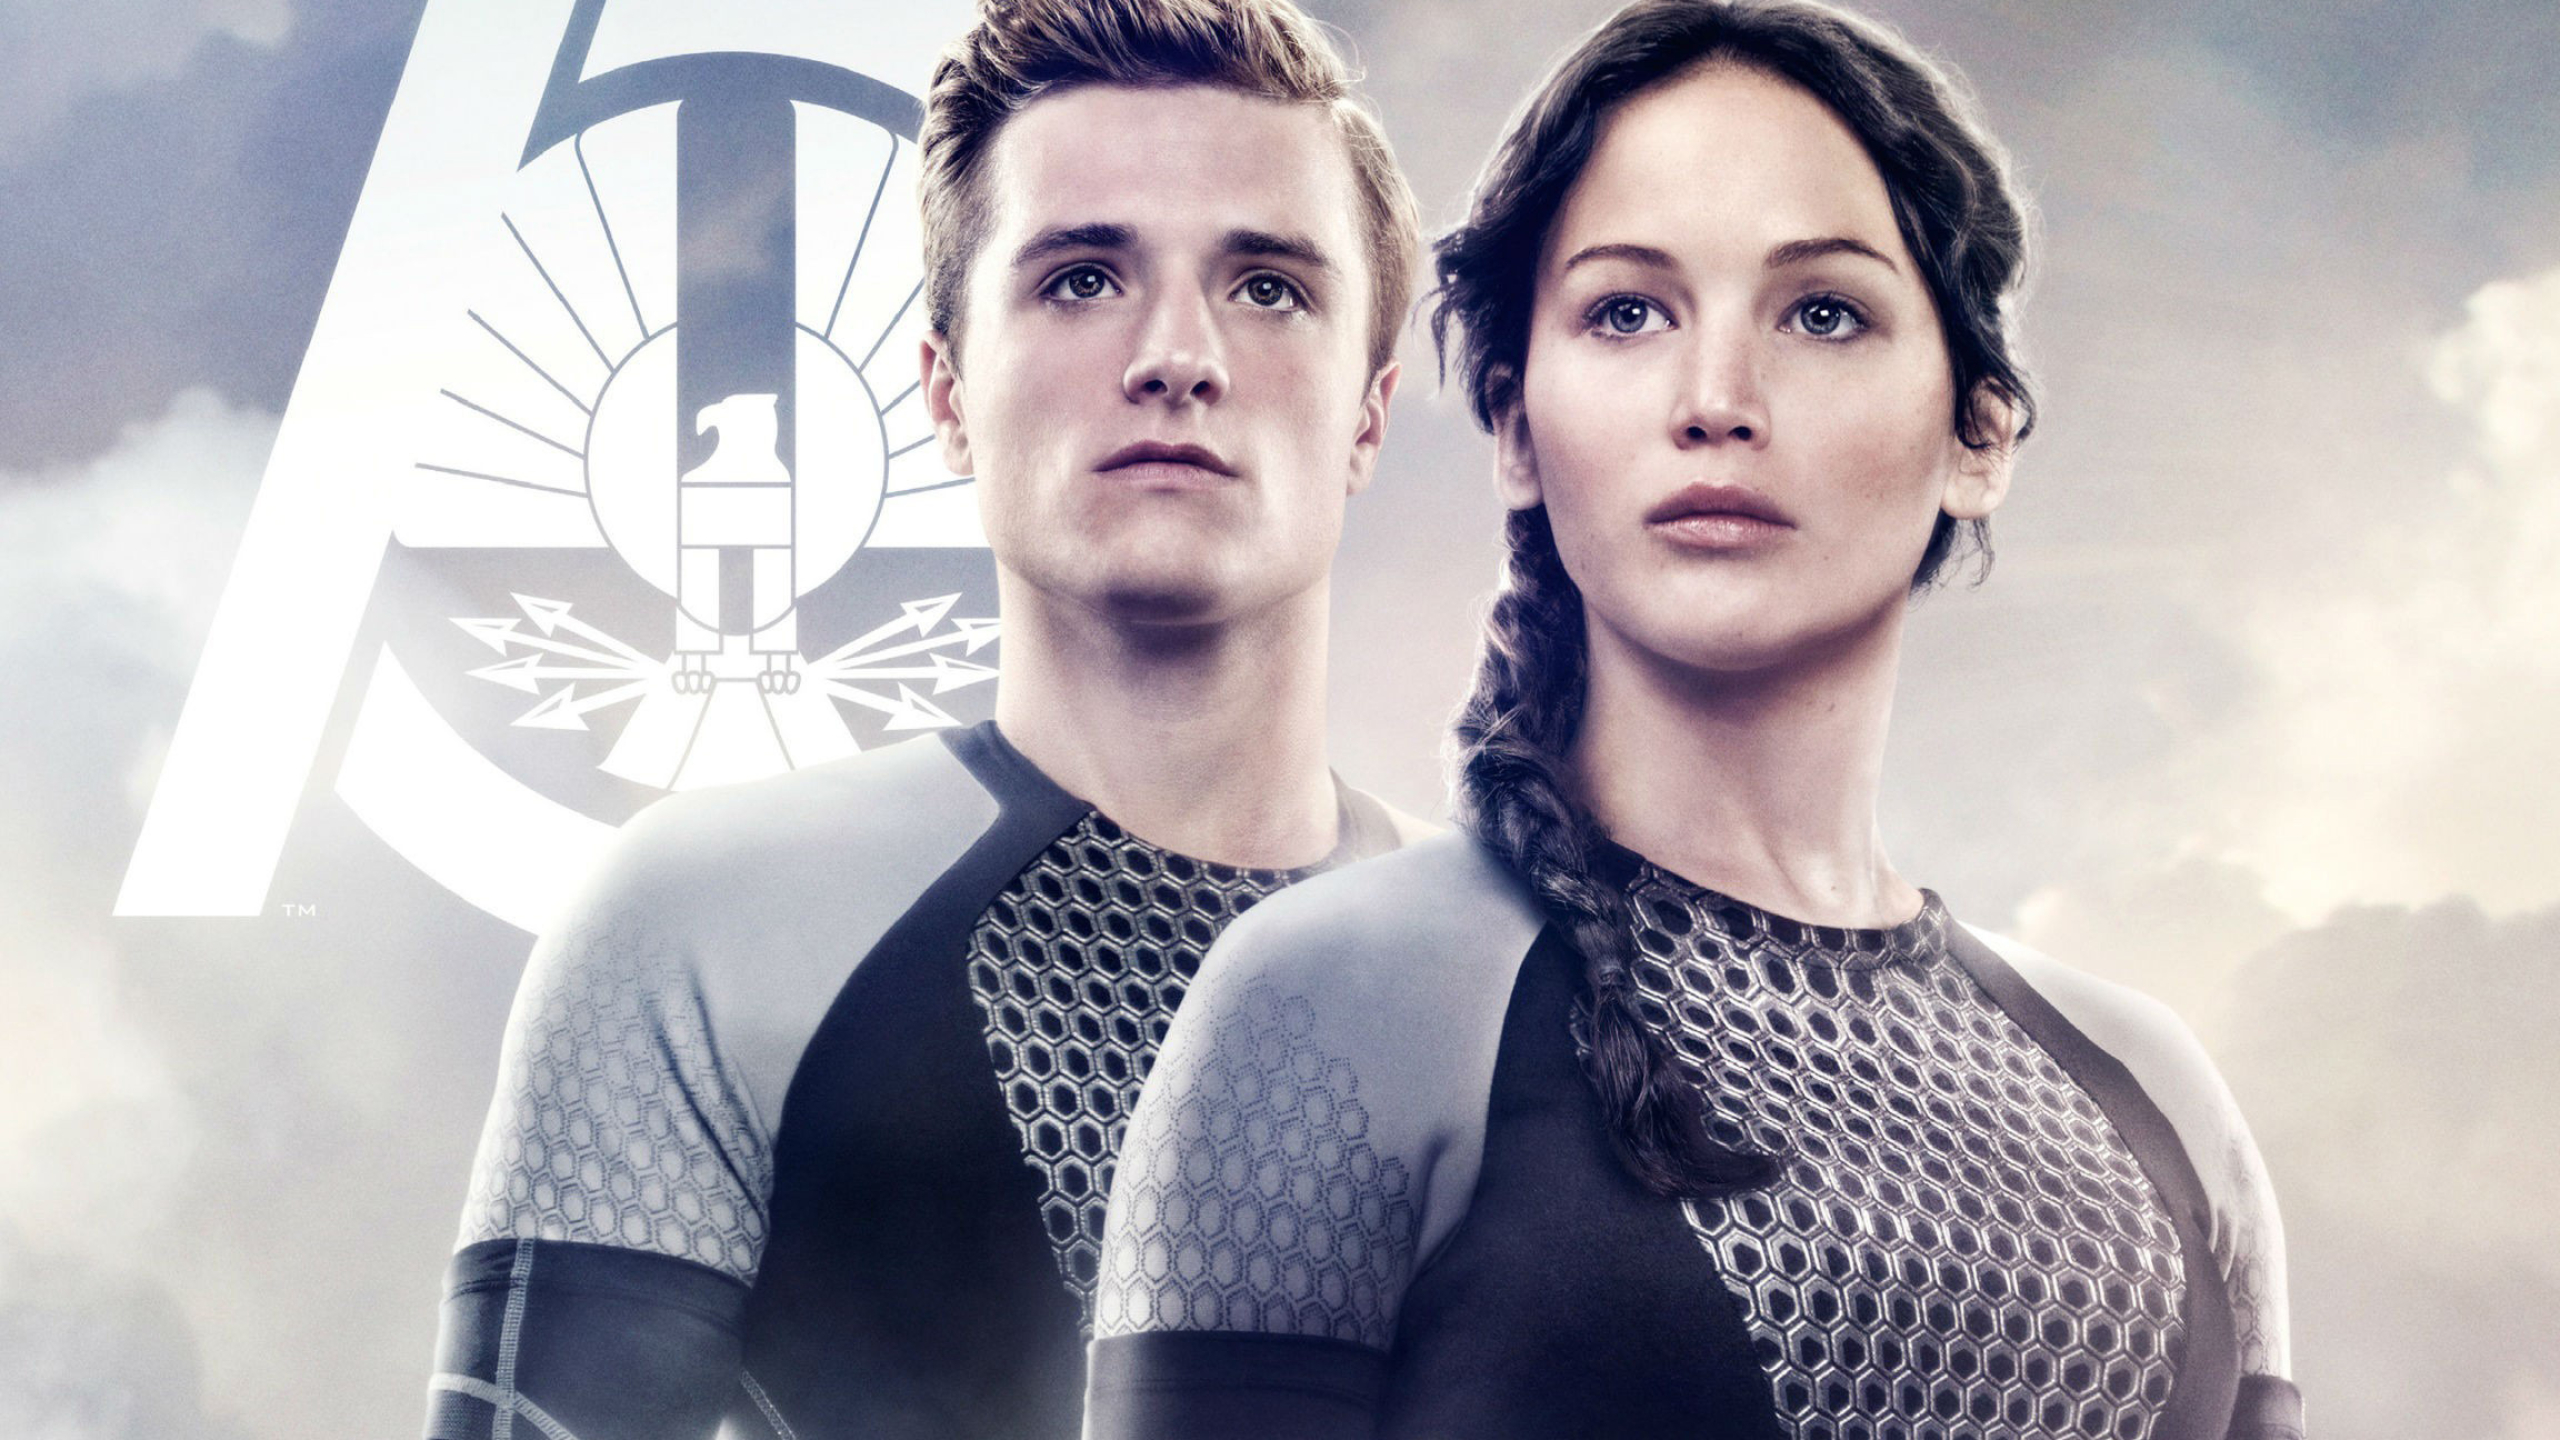 The Hunger Games, Catching fire, Movie wallpapers, 22939, 2560x1440 HD Desktop